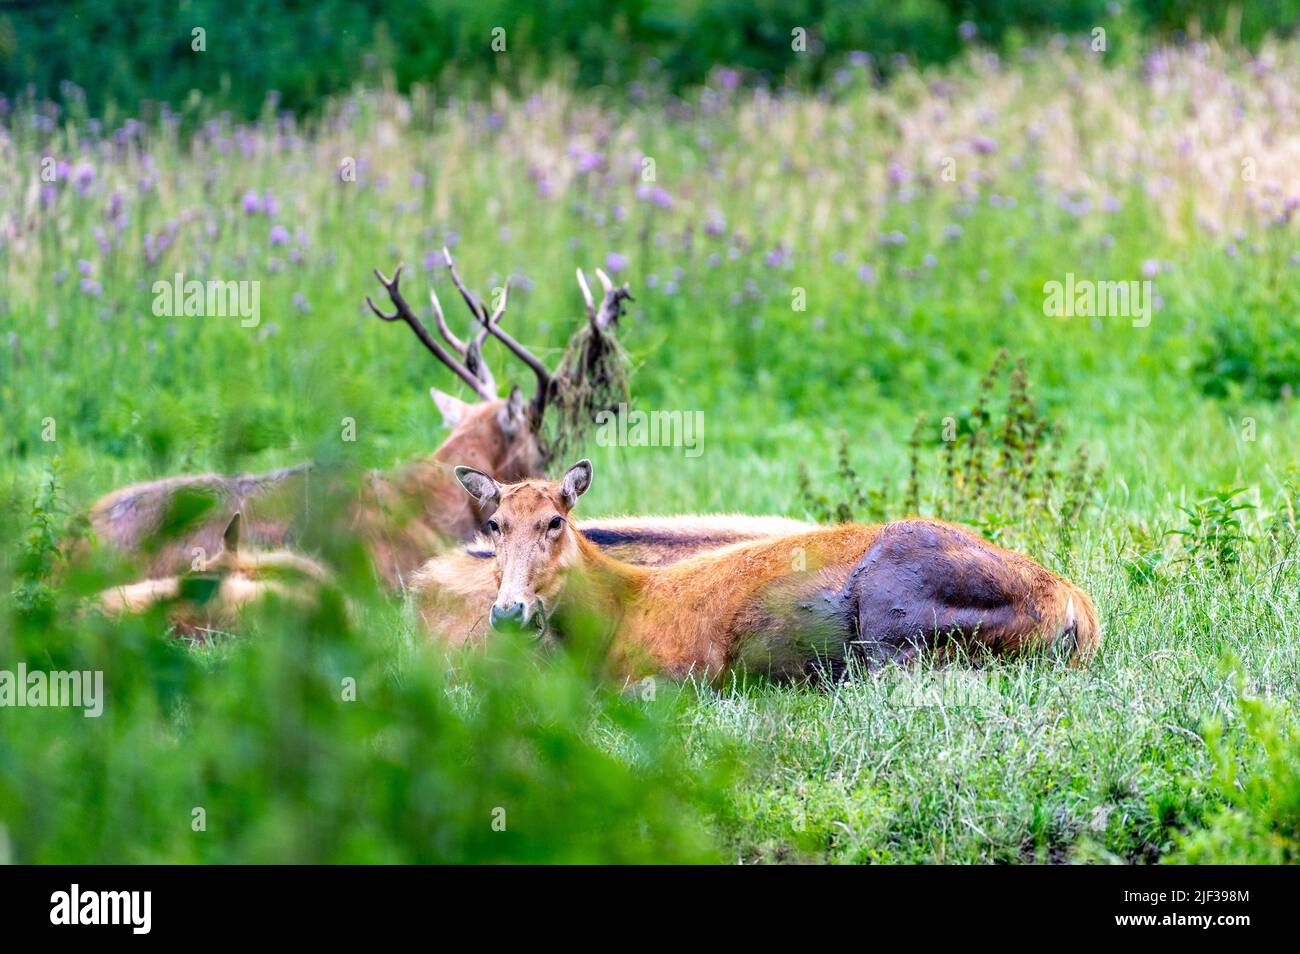 A group of brown milu deer laying on a floral field Stock Photo